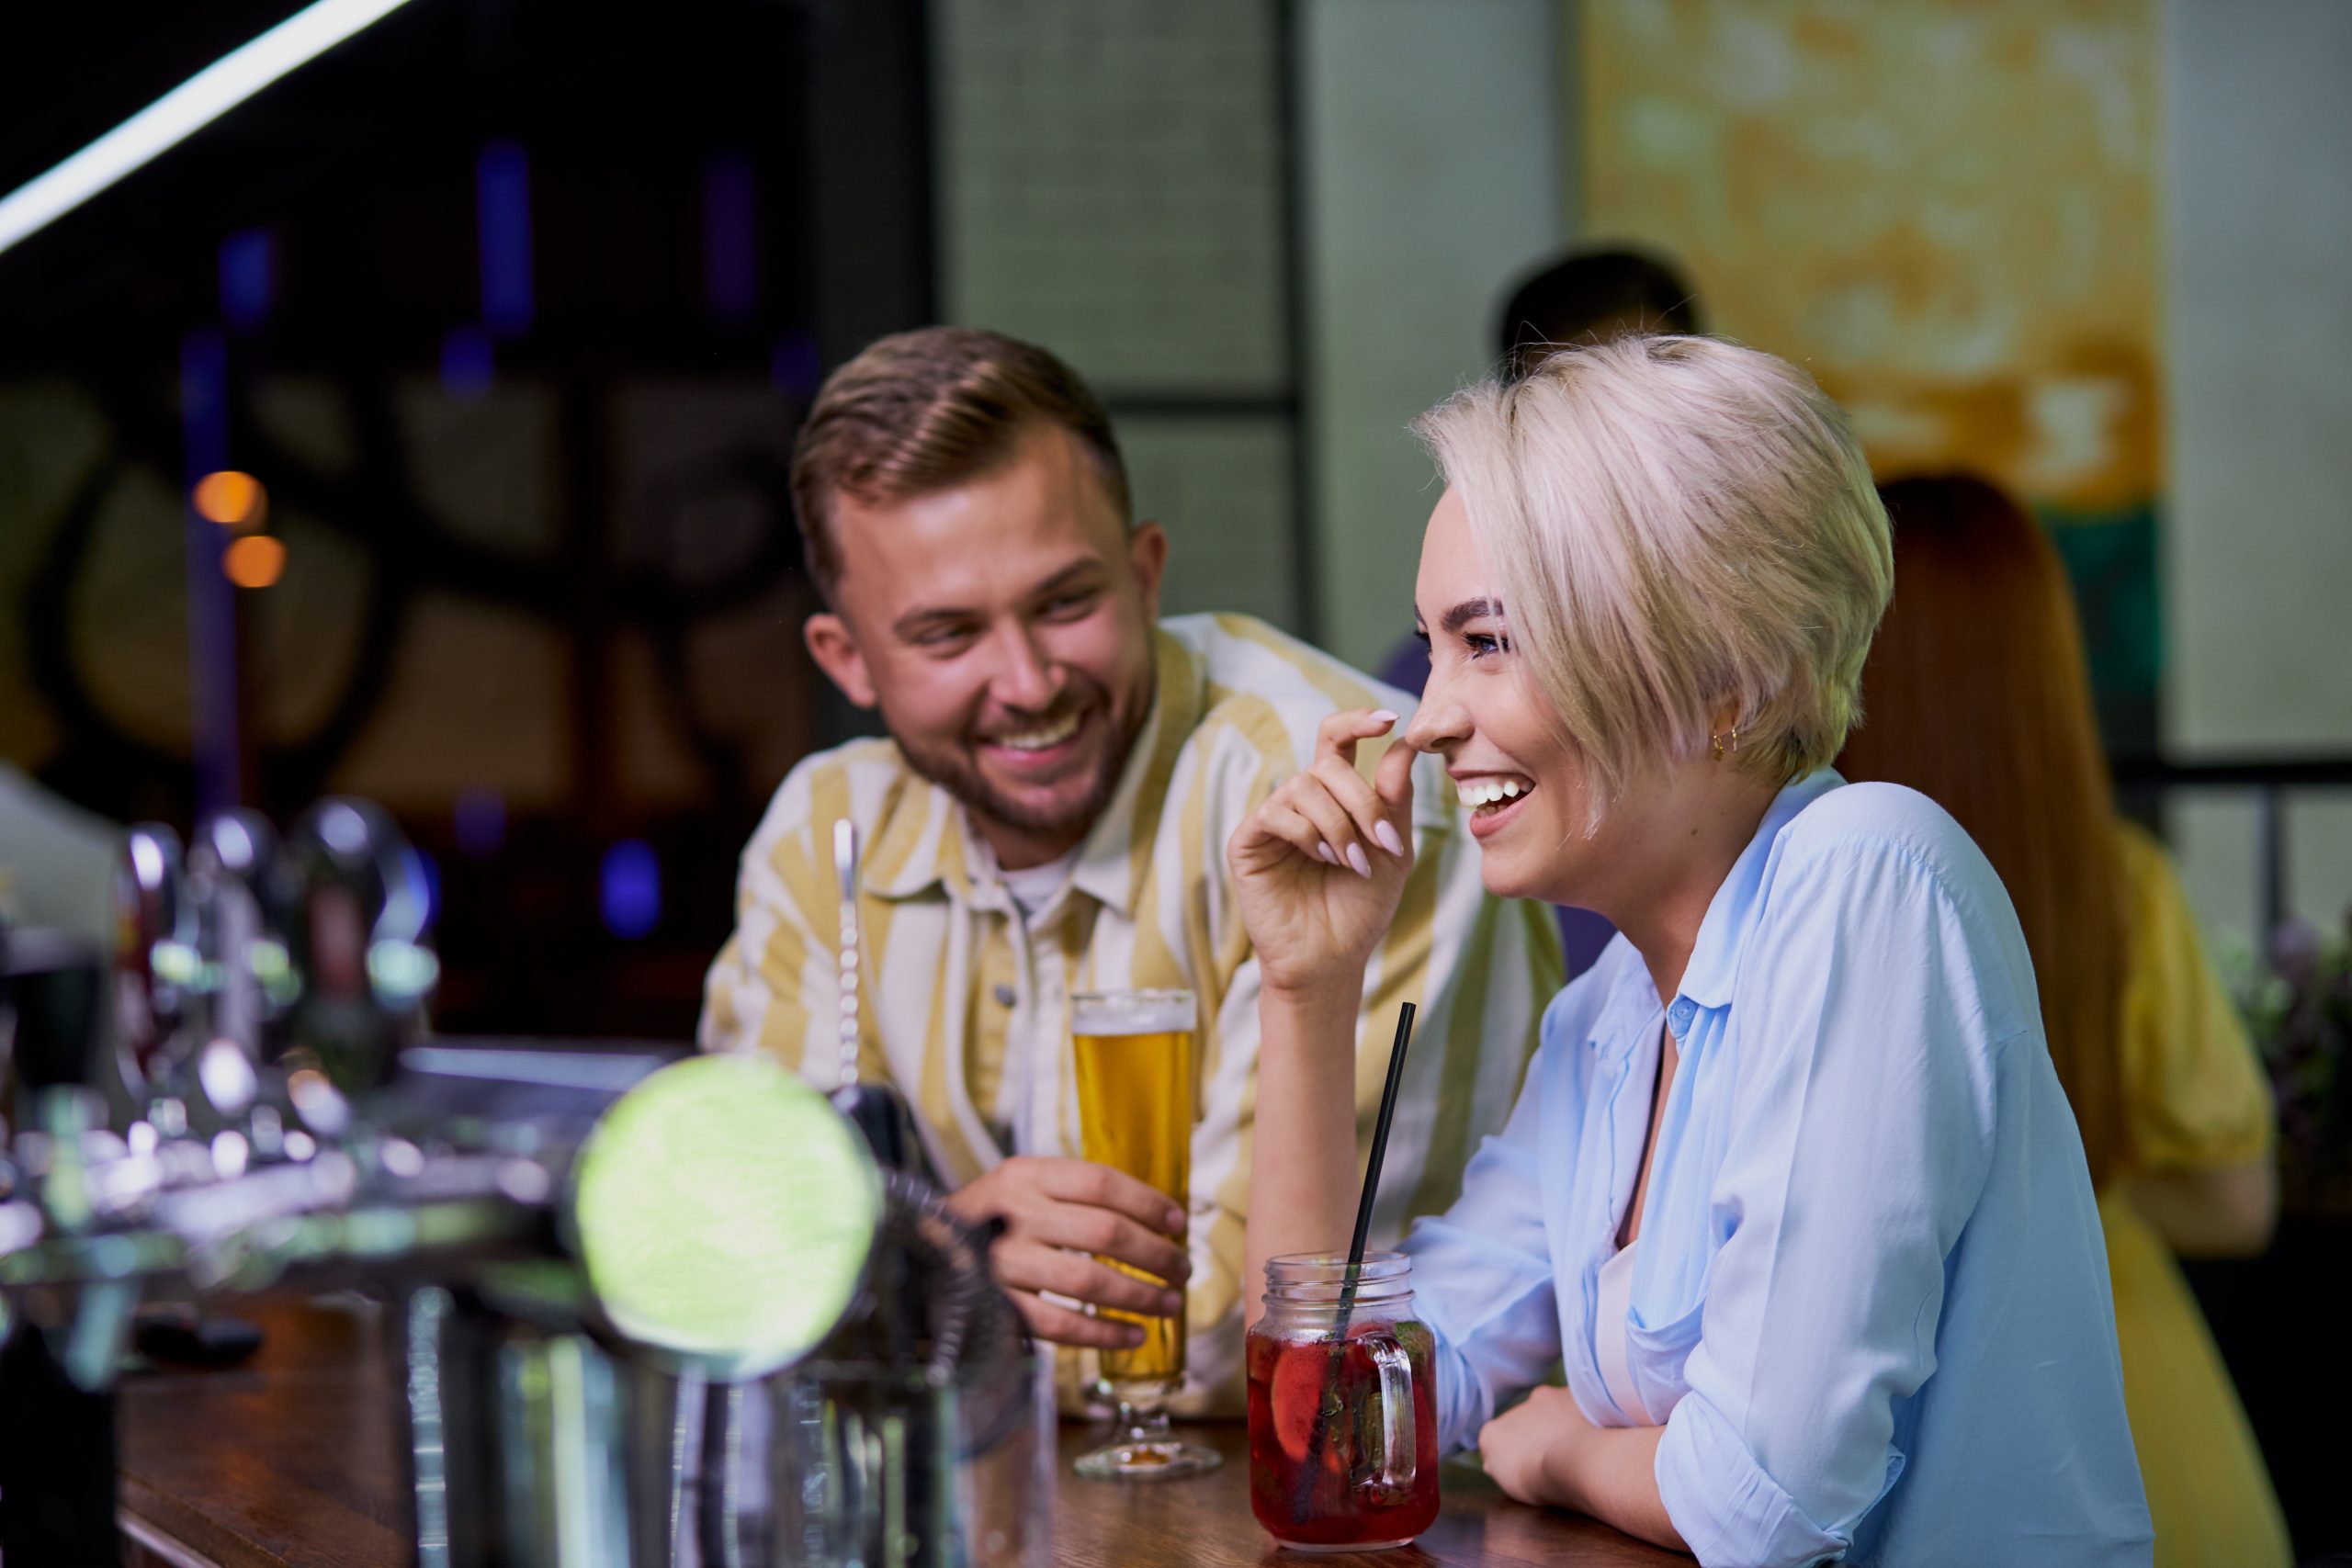 How to become a master at talking to strangers at the bar